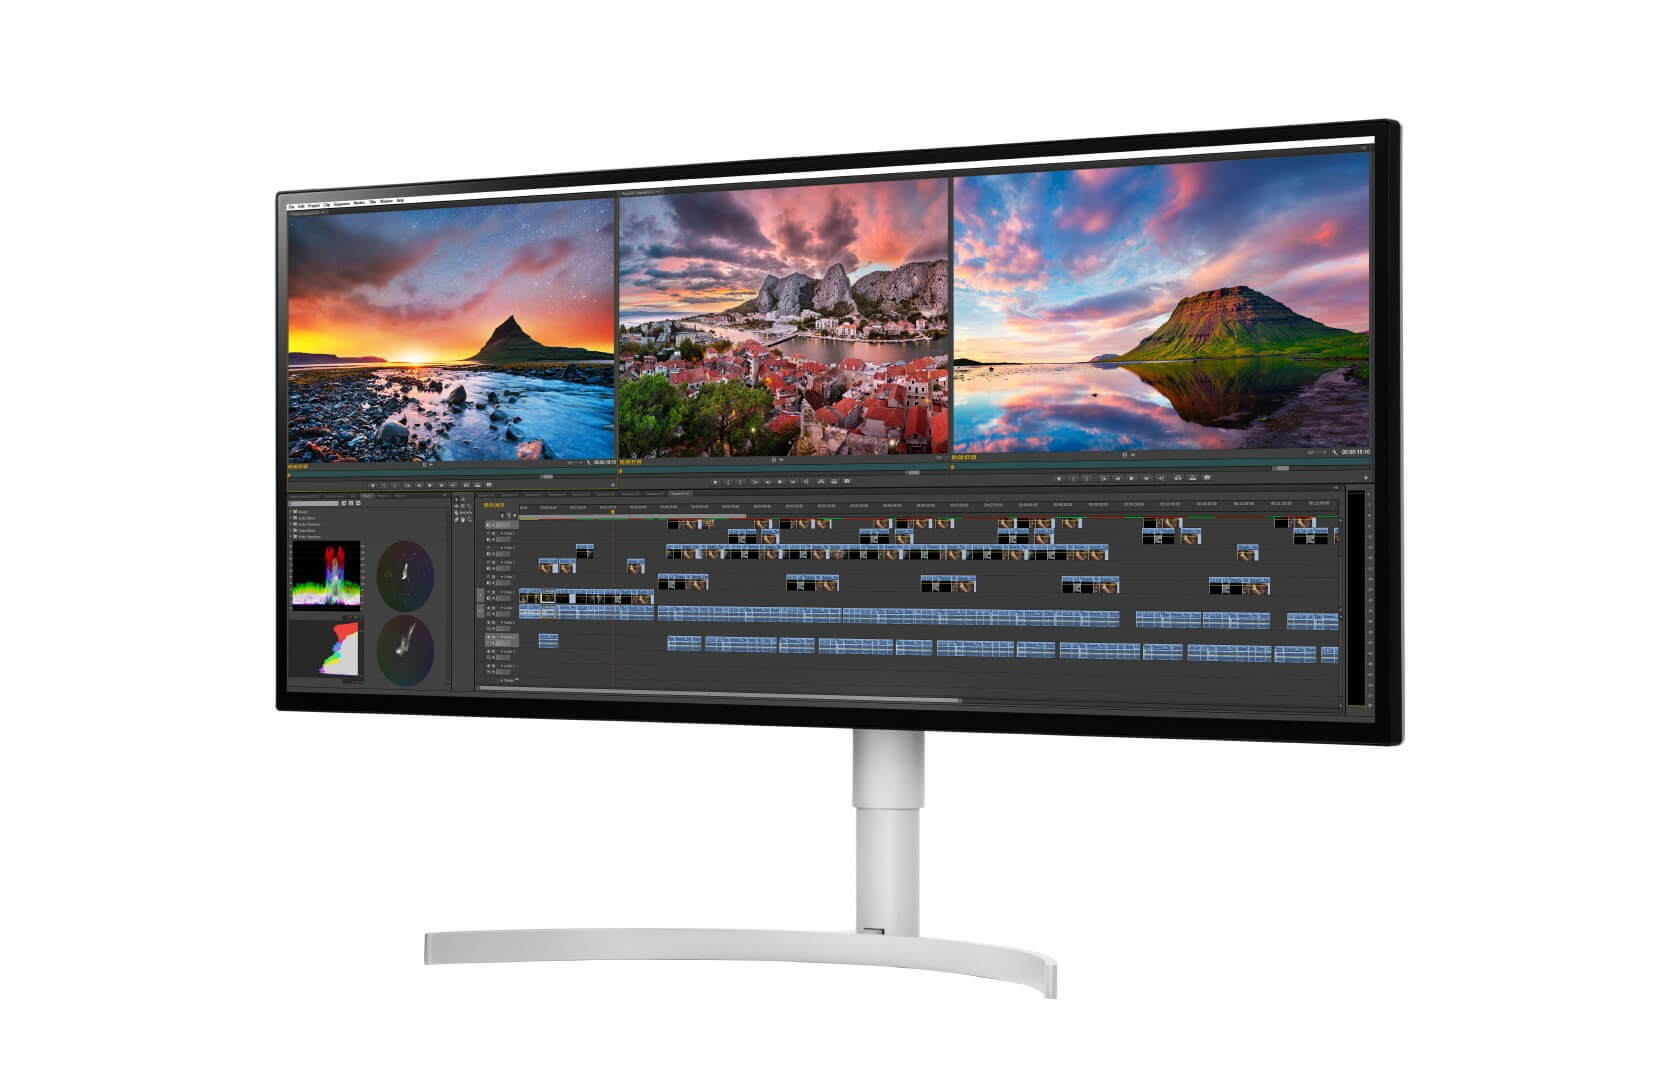 LG to unveil three new HDR monitors at CES, including 5K ultrawide model